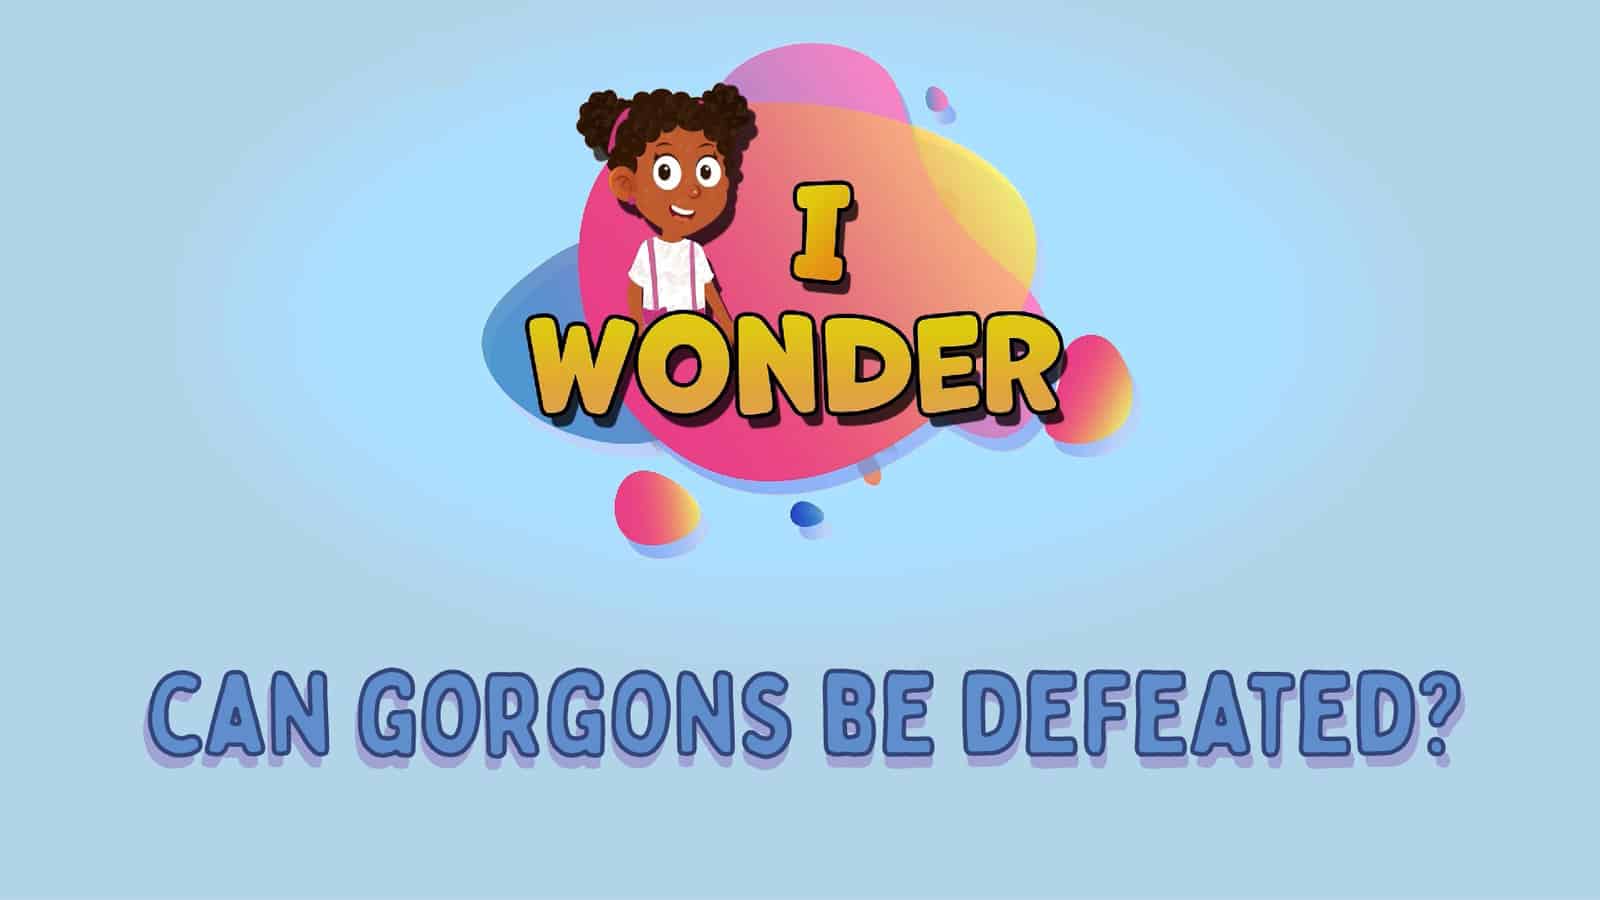 Can Gorgons Be Defeated?